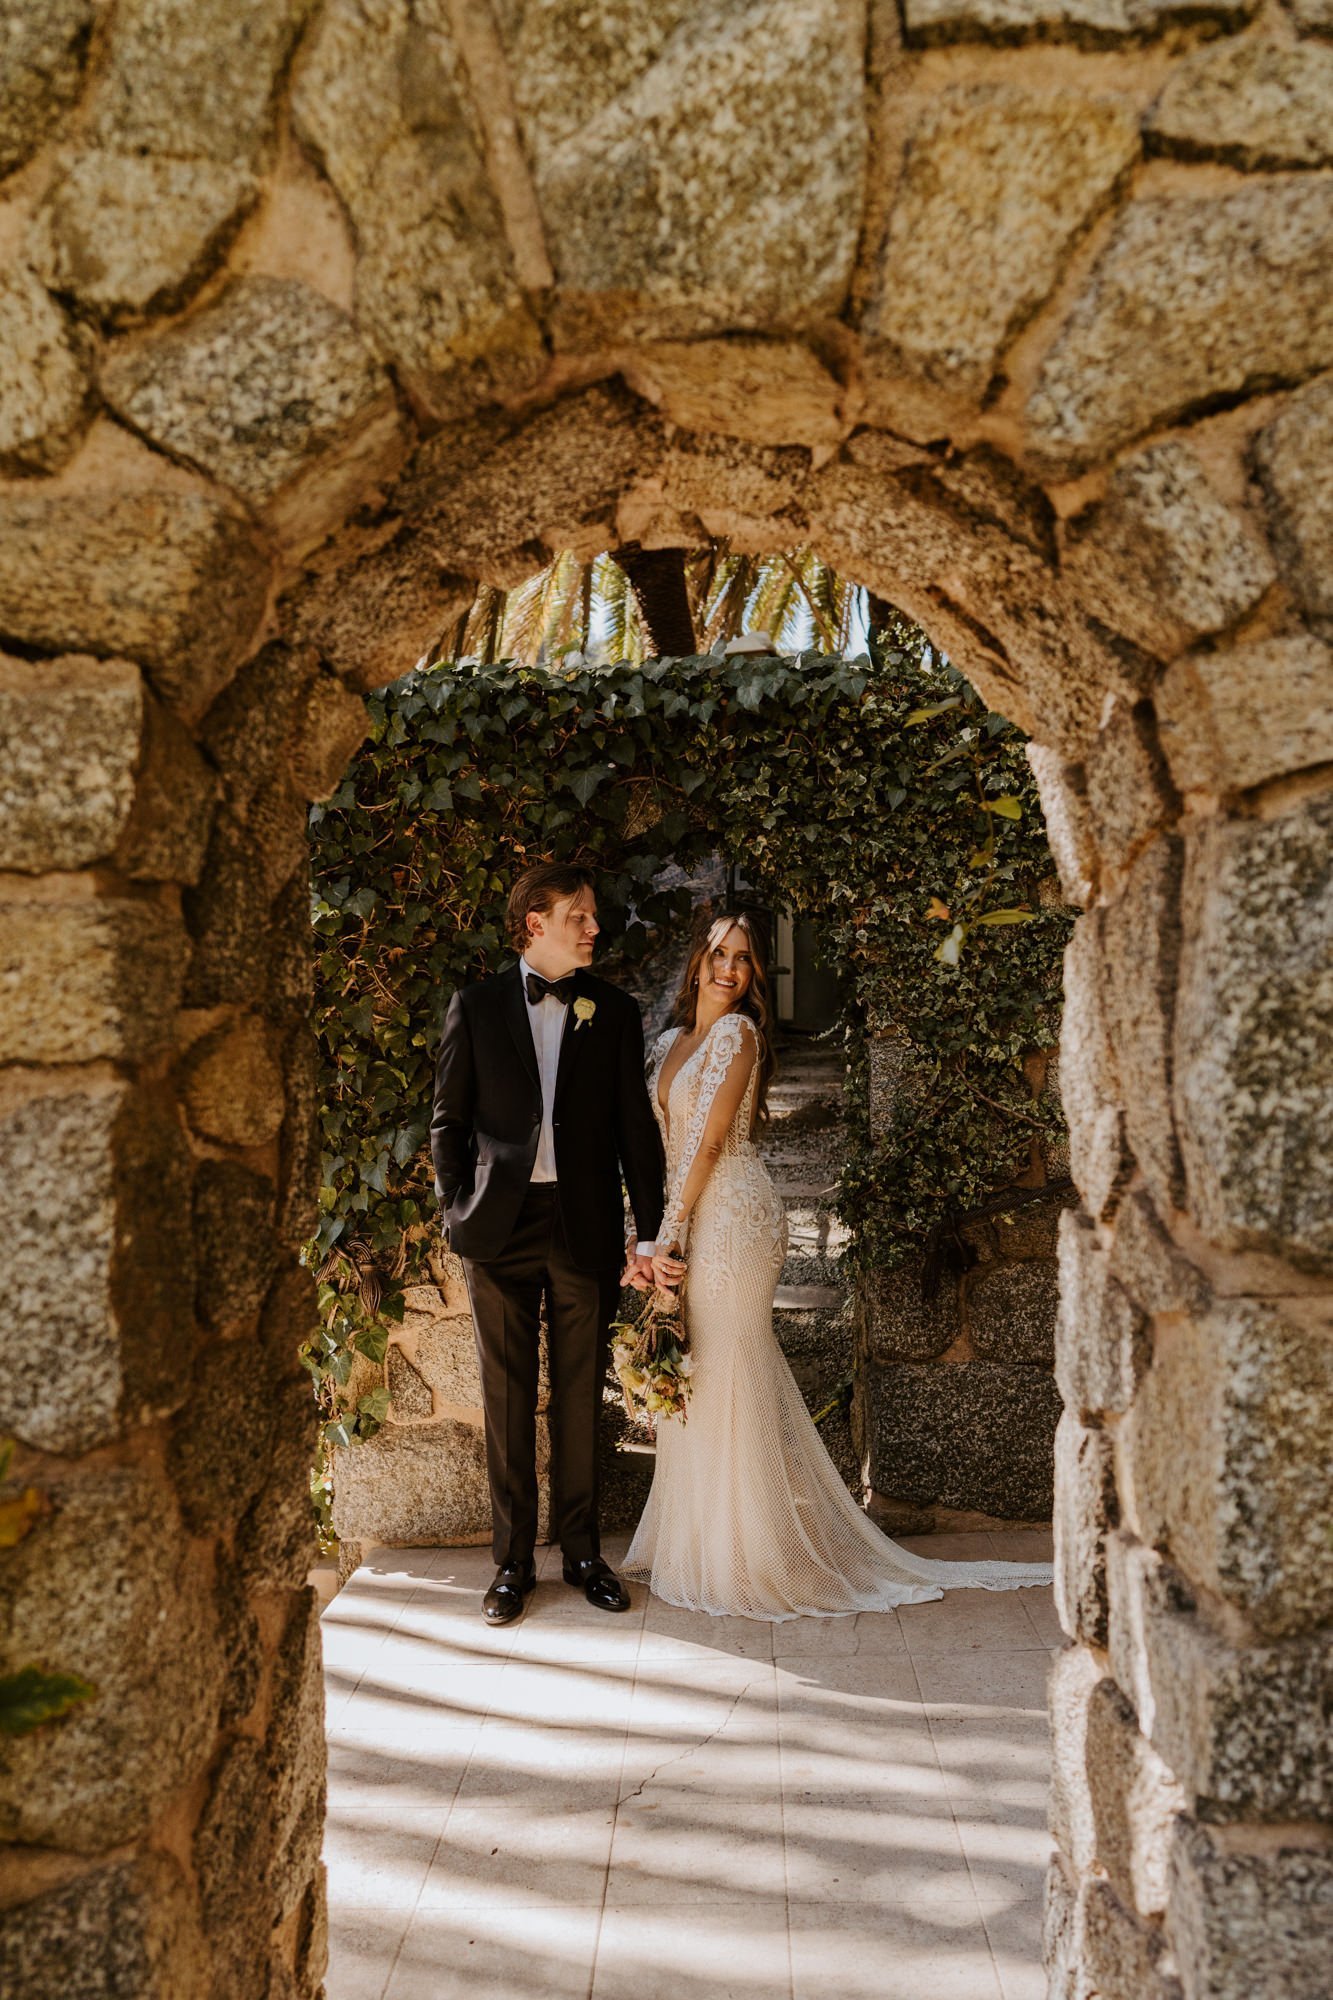 Romantic bride and groom portrait at The Houdini Estate Wedding in Los Angeles, vibrant and candid wedding photography by Tida Svy